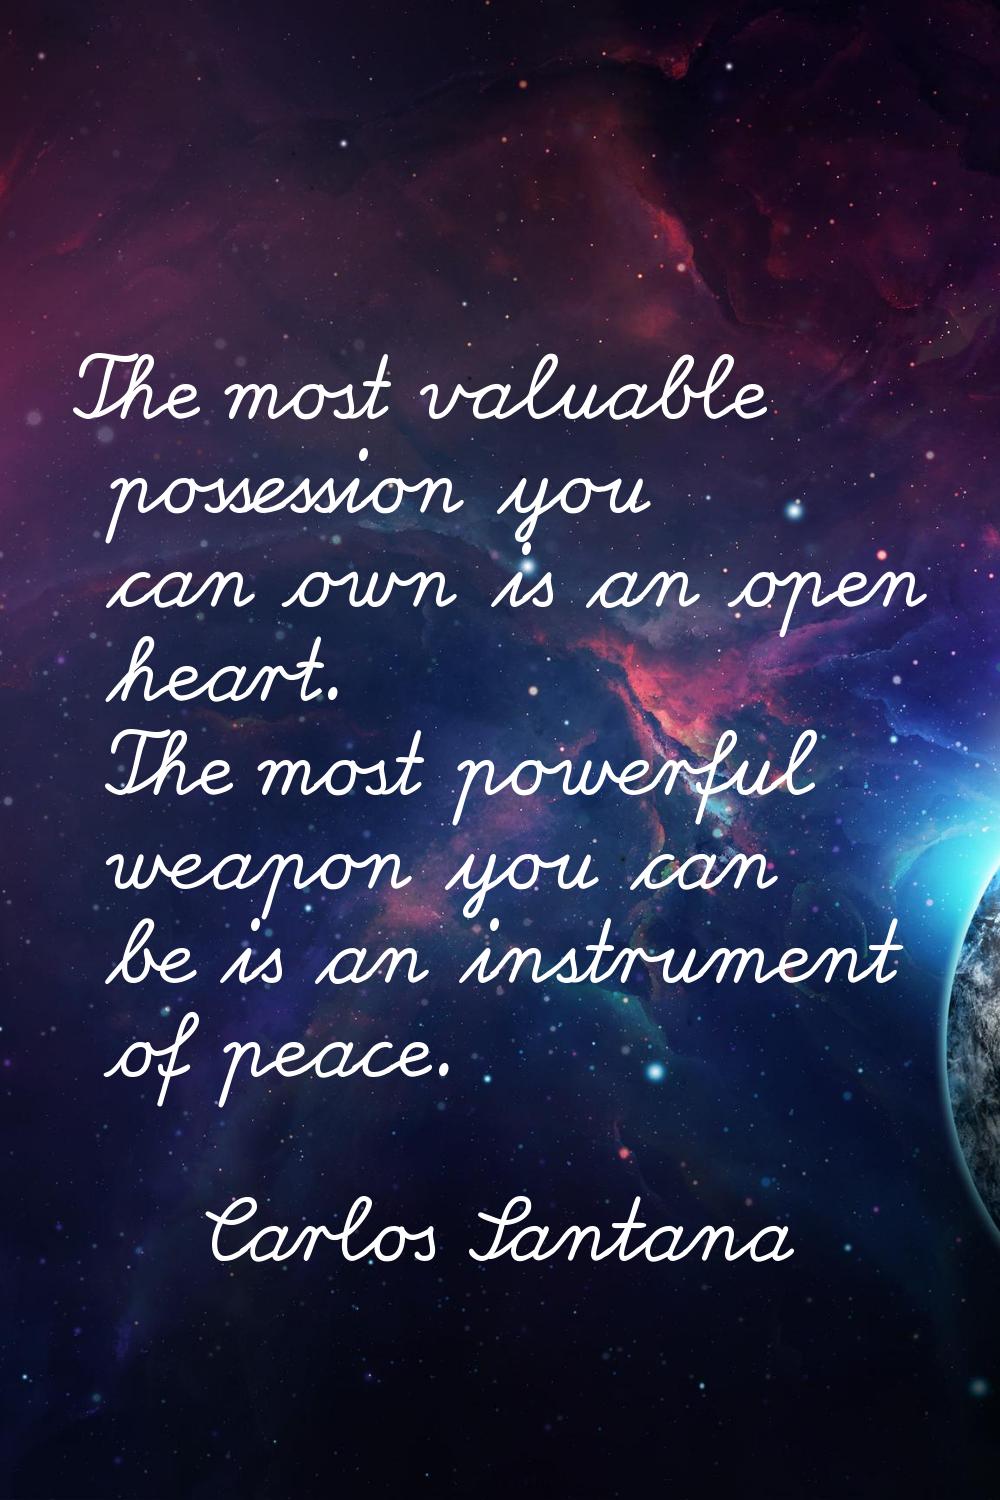 The most valuable possession you can own is an open heart. The most powerful weapon you can be is a